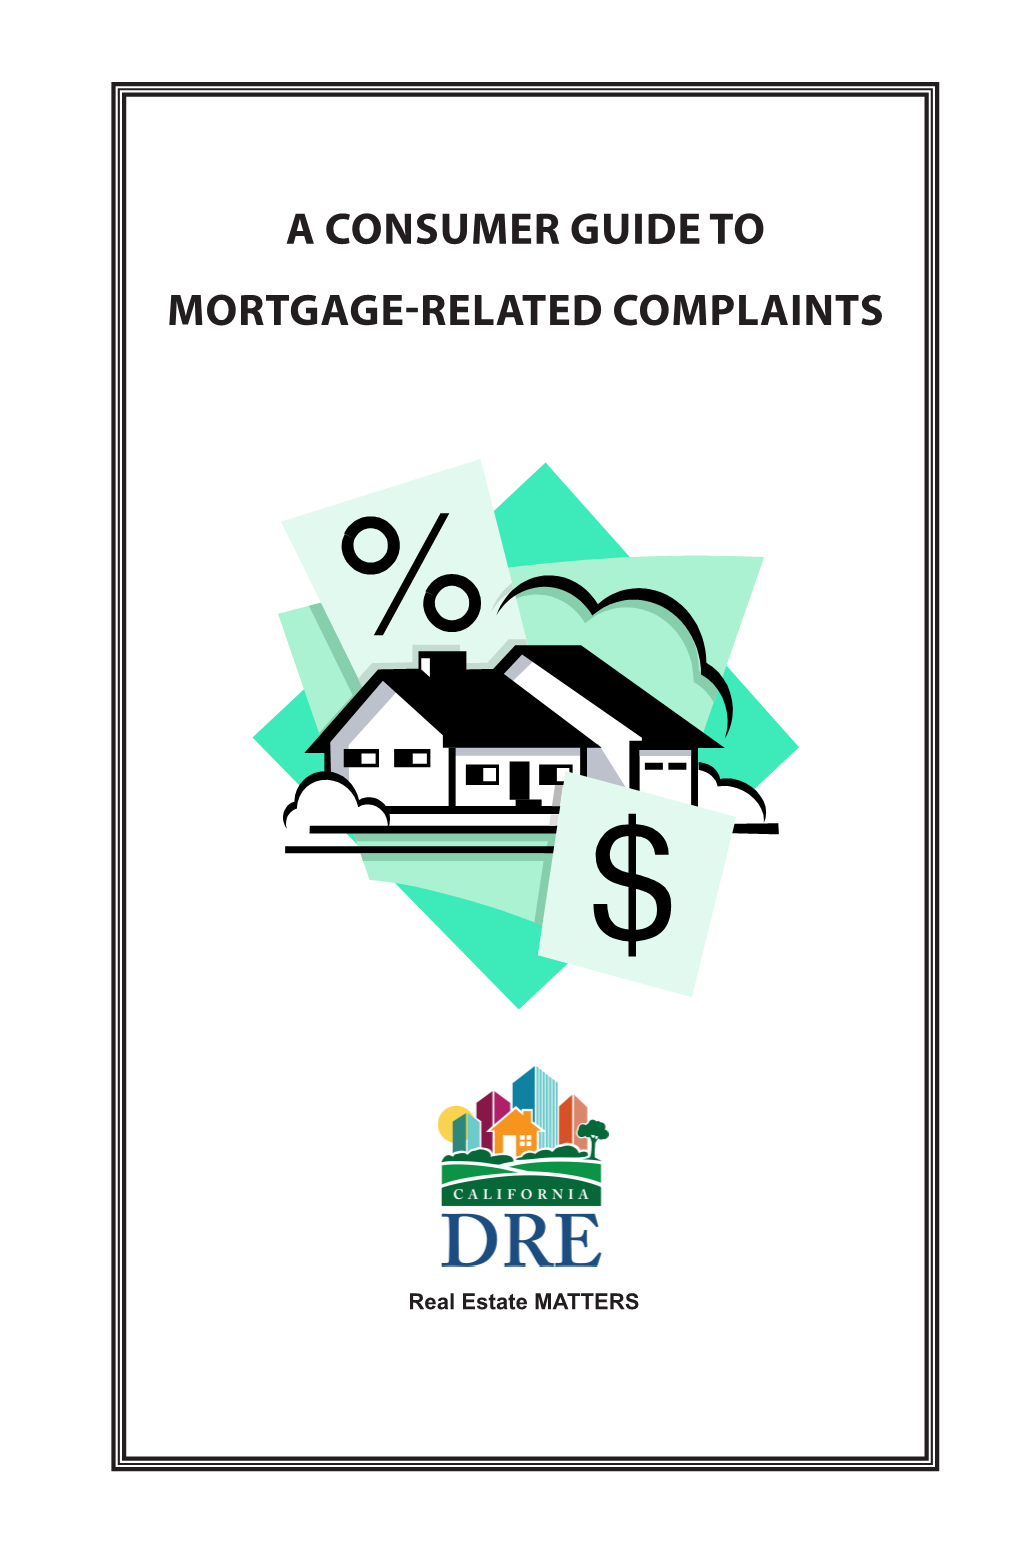 A Consumer Guide to Mortgage-Related Complaints